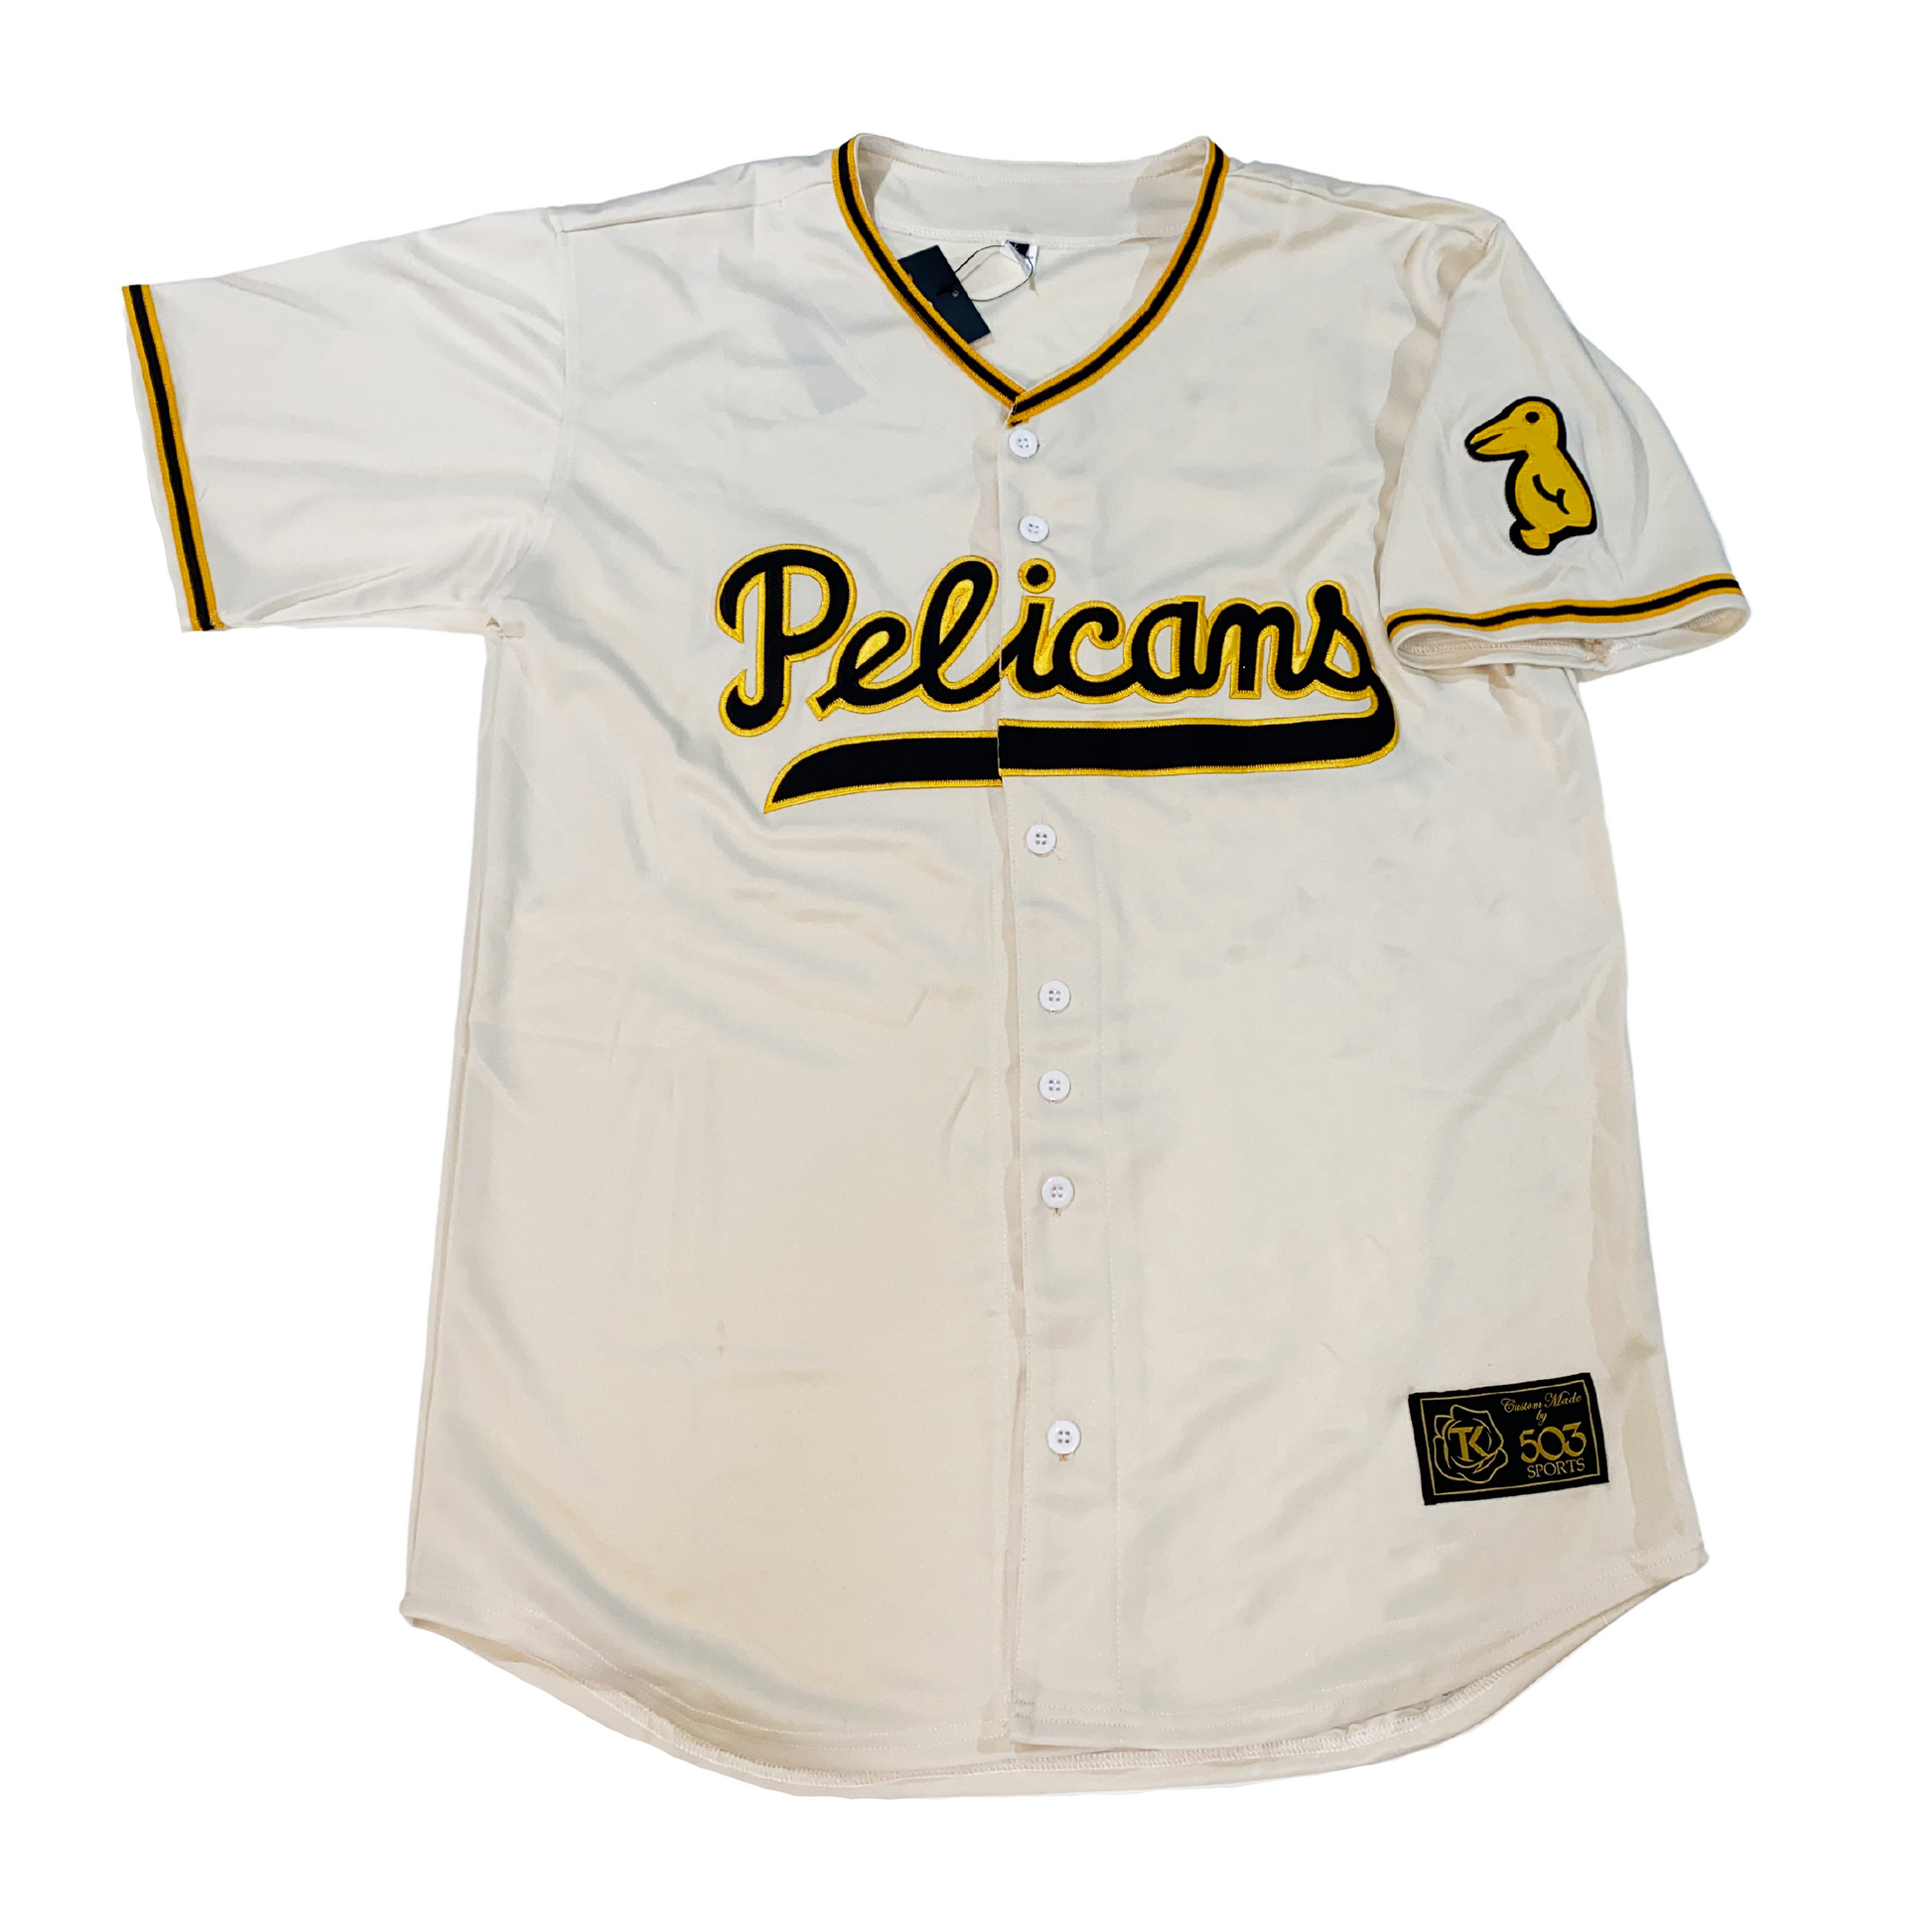 New Orleans Pelicans Signed Jerseys, Collectible Pelicans Jerseys